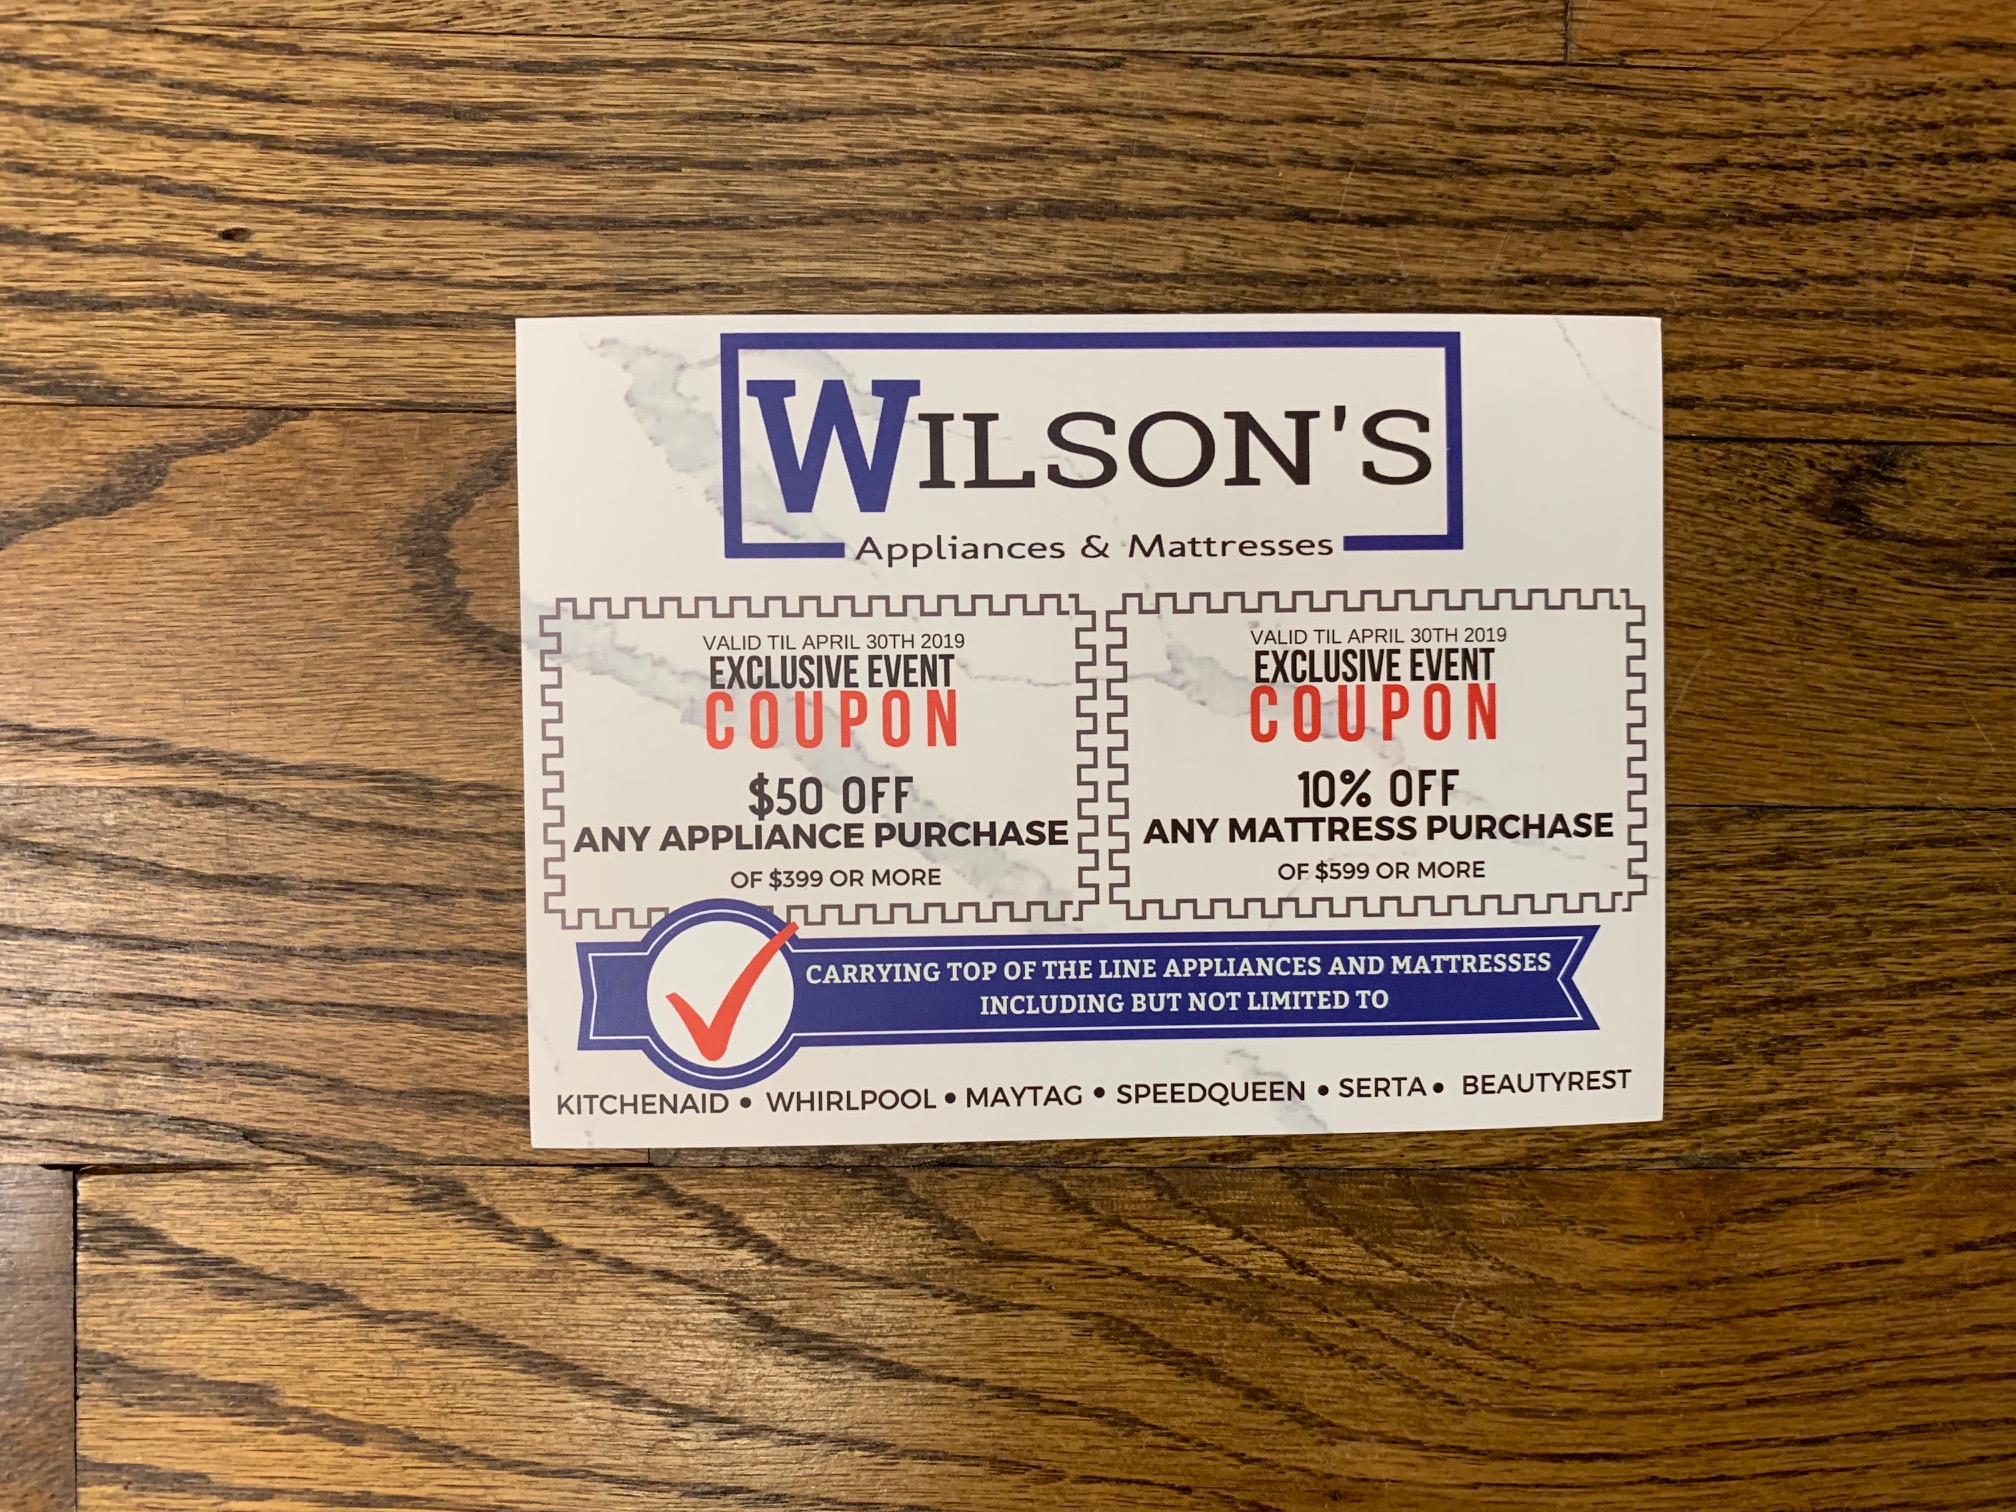 wilson's appliances & mattresses shop in conroe, coupons